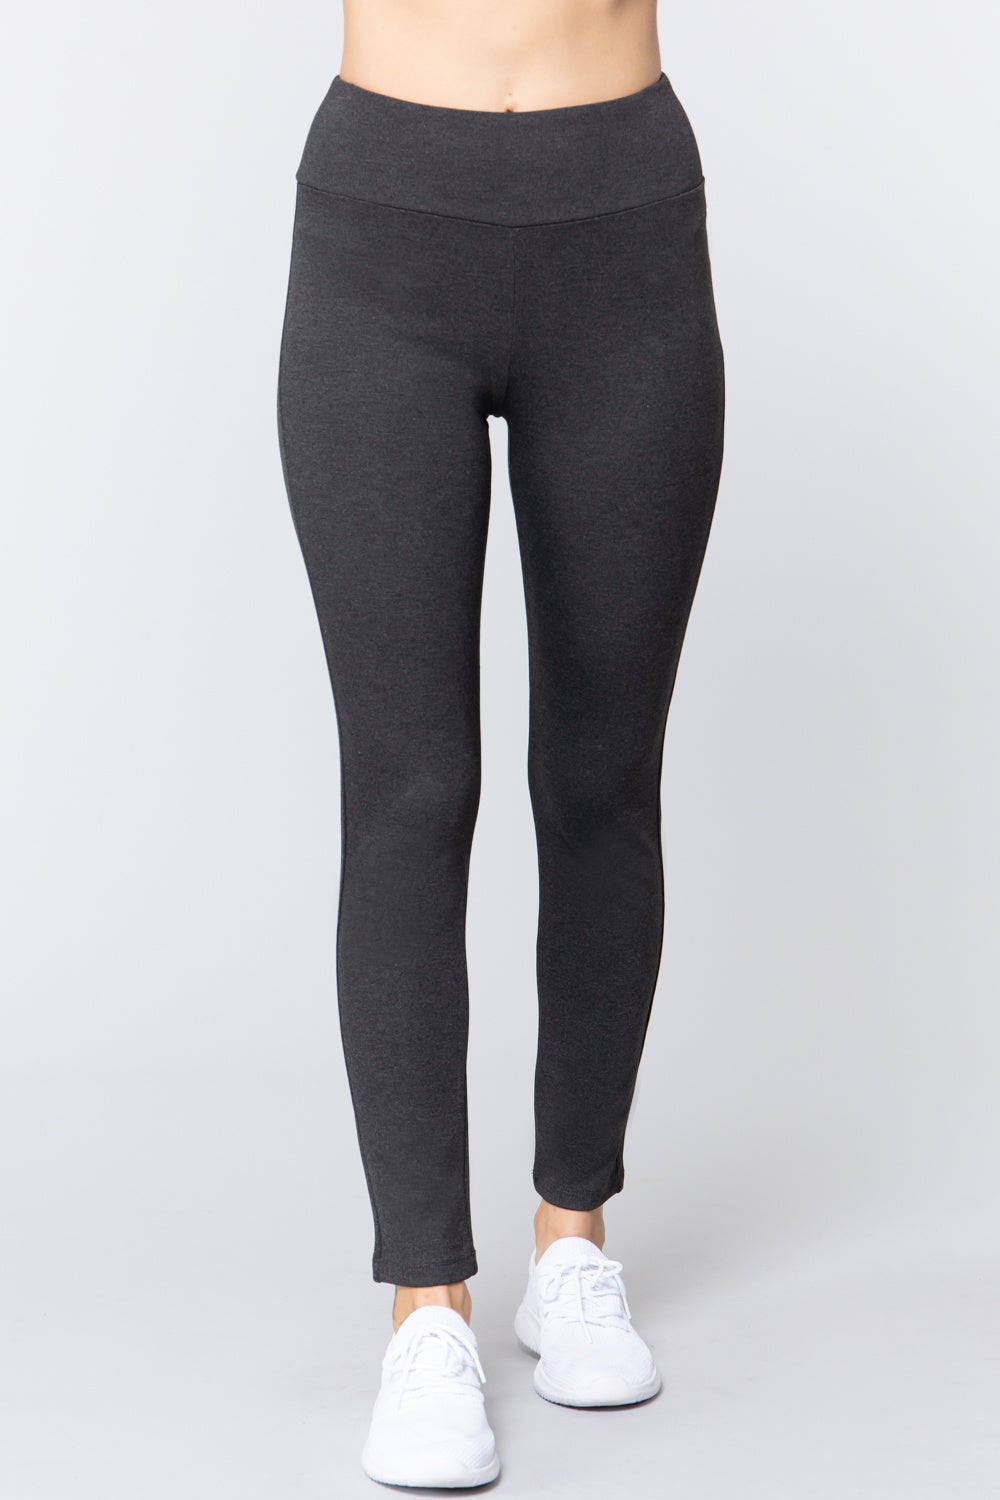 Waist Band Long Ponte Pants in Charcoal Grey